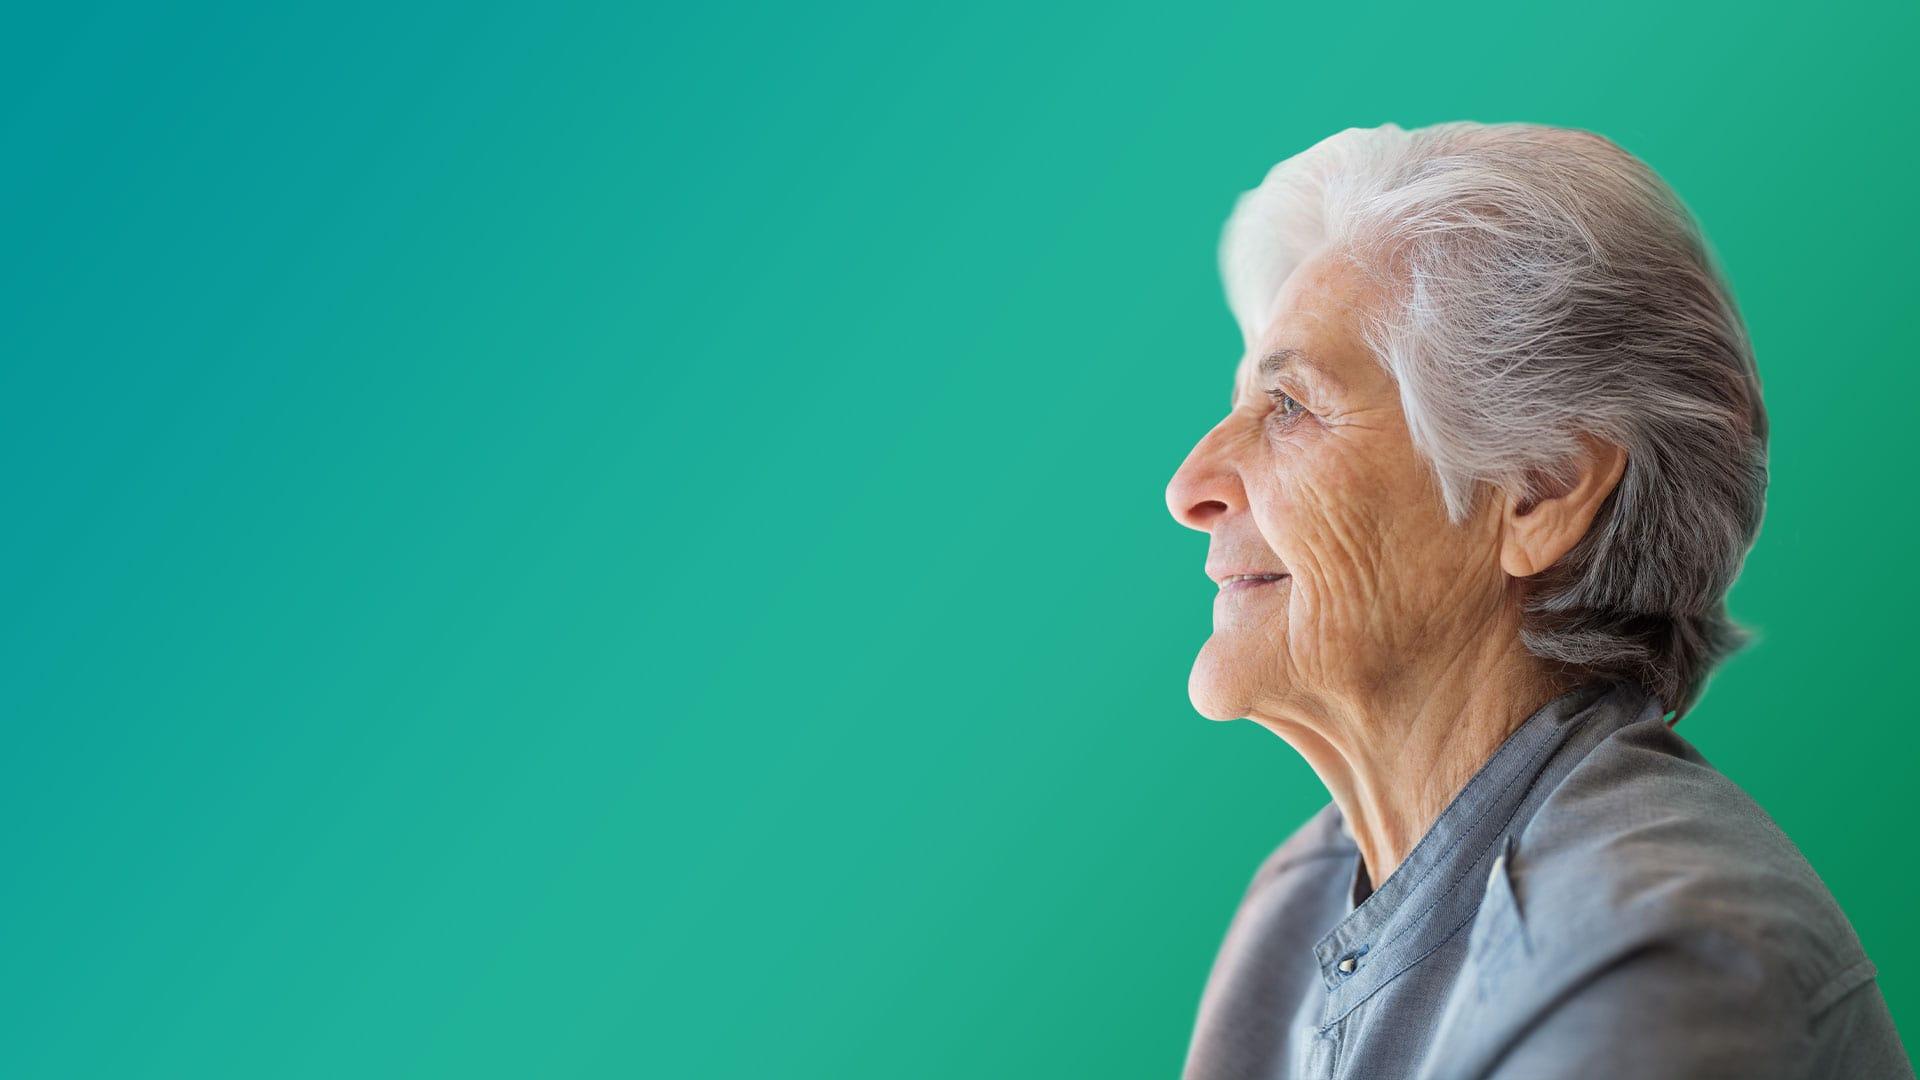 Image of an older woman looking to the left side of the screen